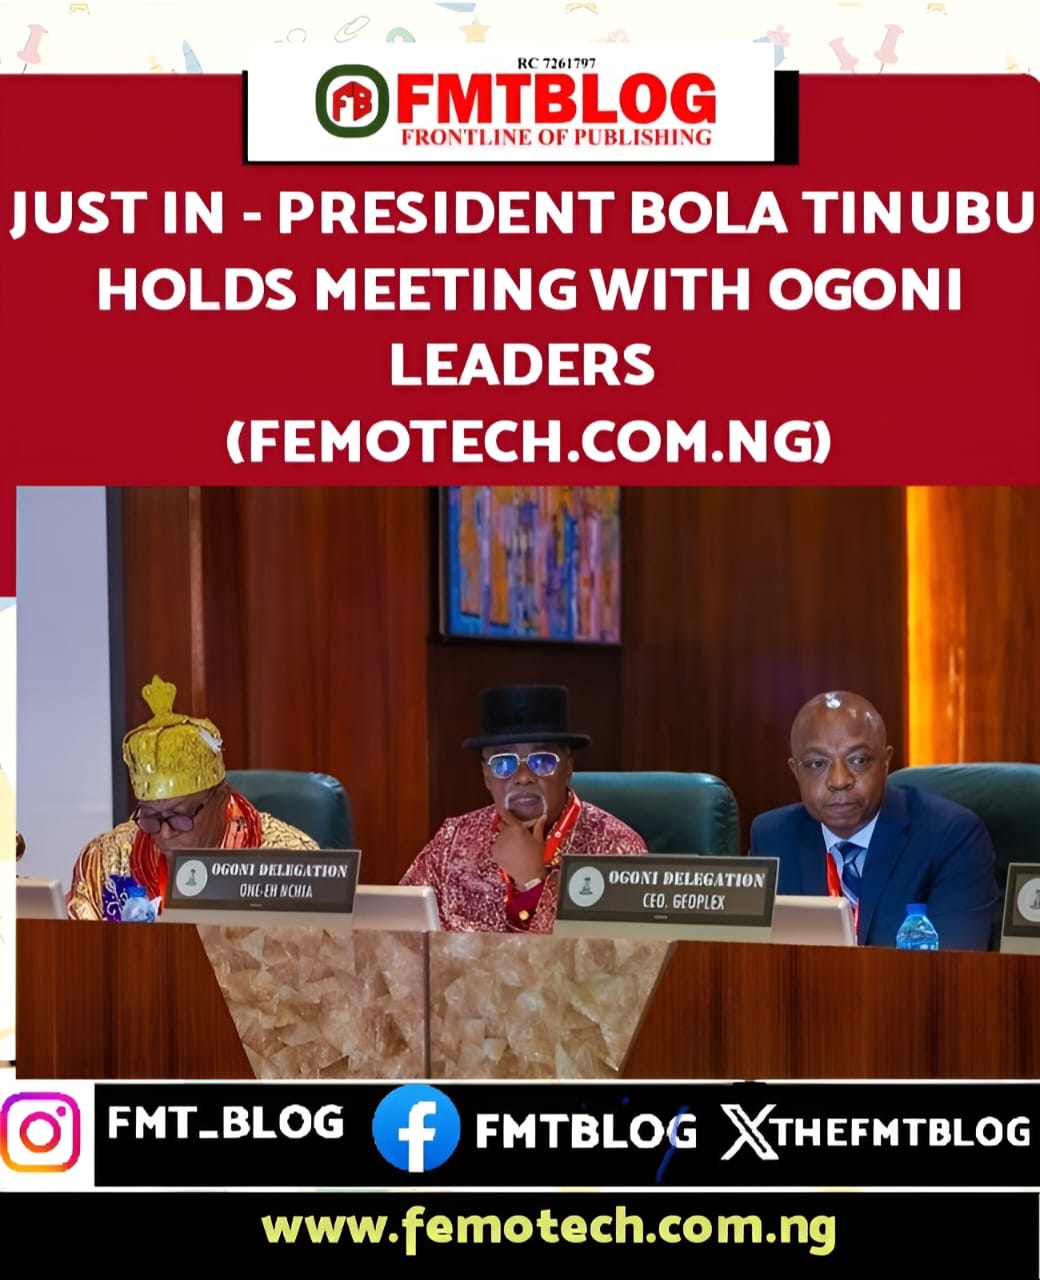 JUST IN- President Bola Tinubu Holds Meeting With Ogoni Leaders